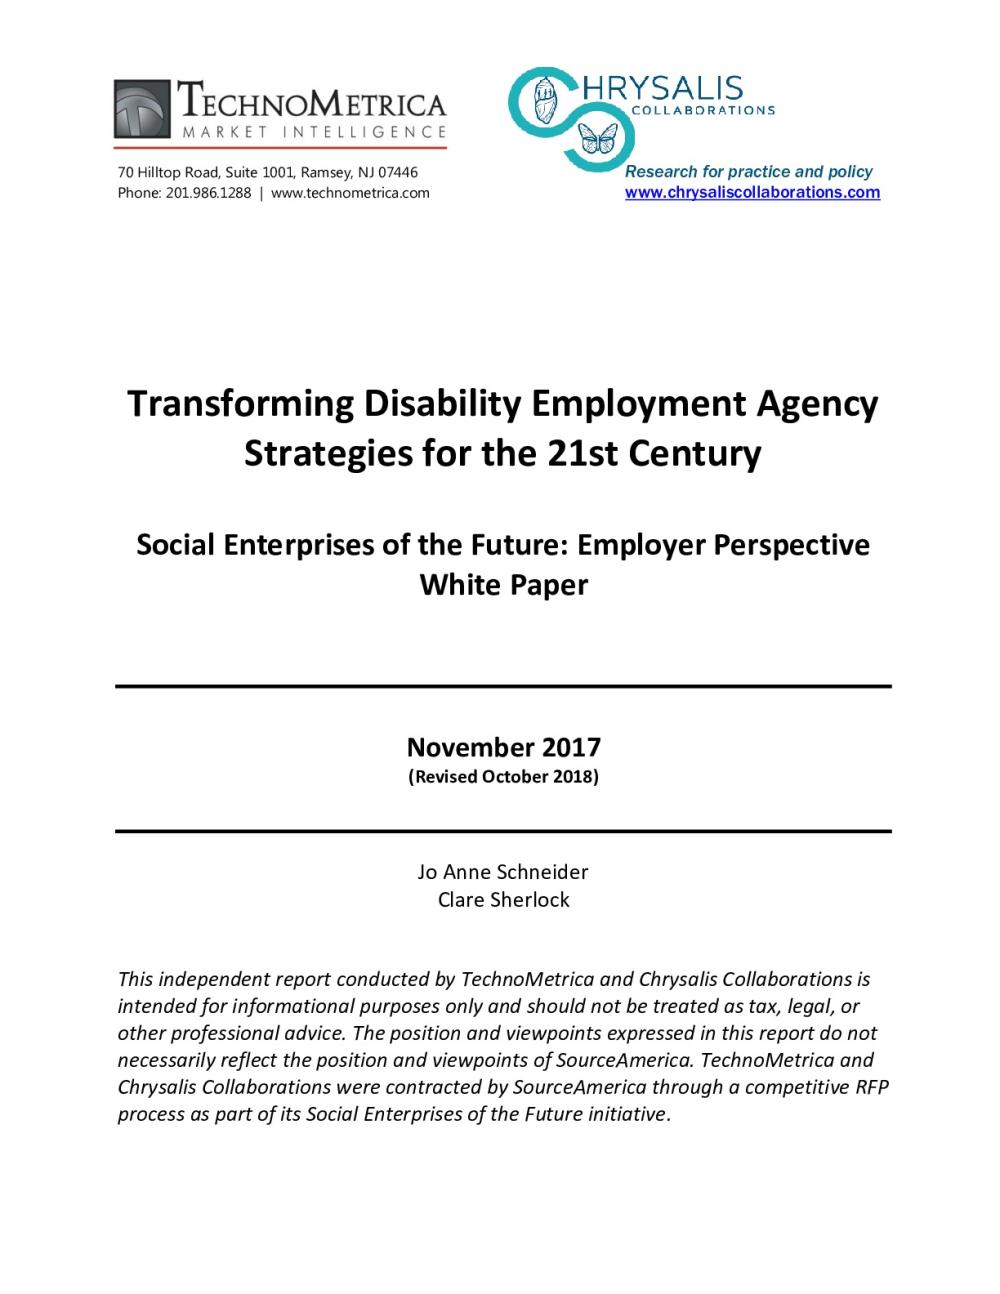 Transforming Disability Employment Agency Strategies for the 21st Century